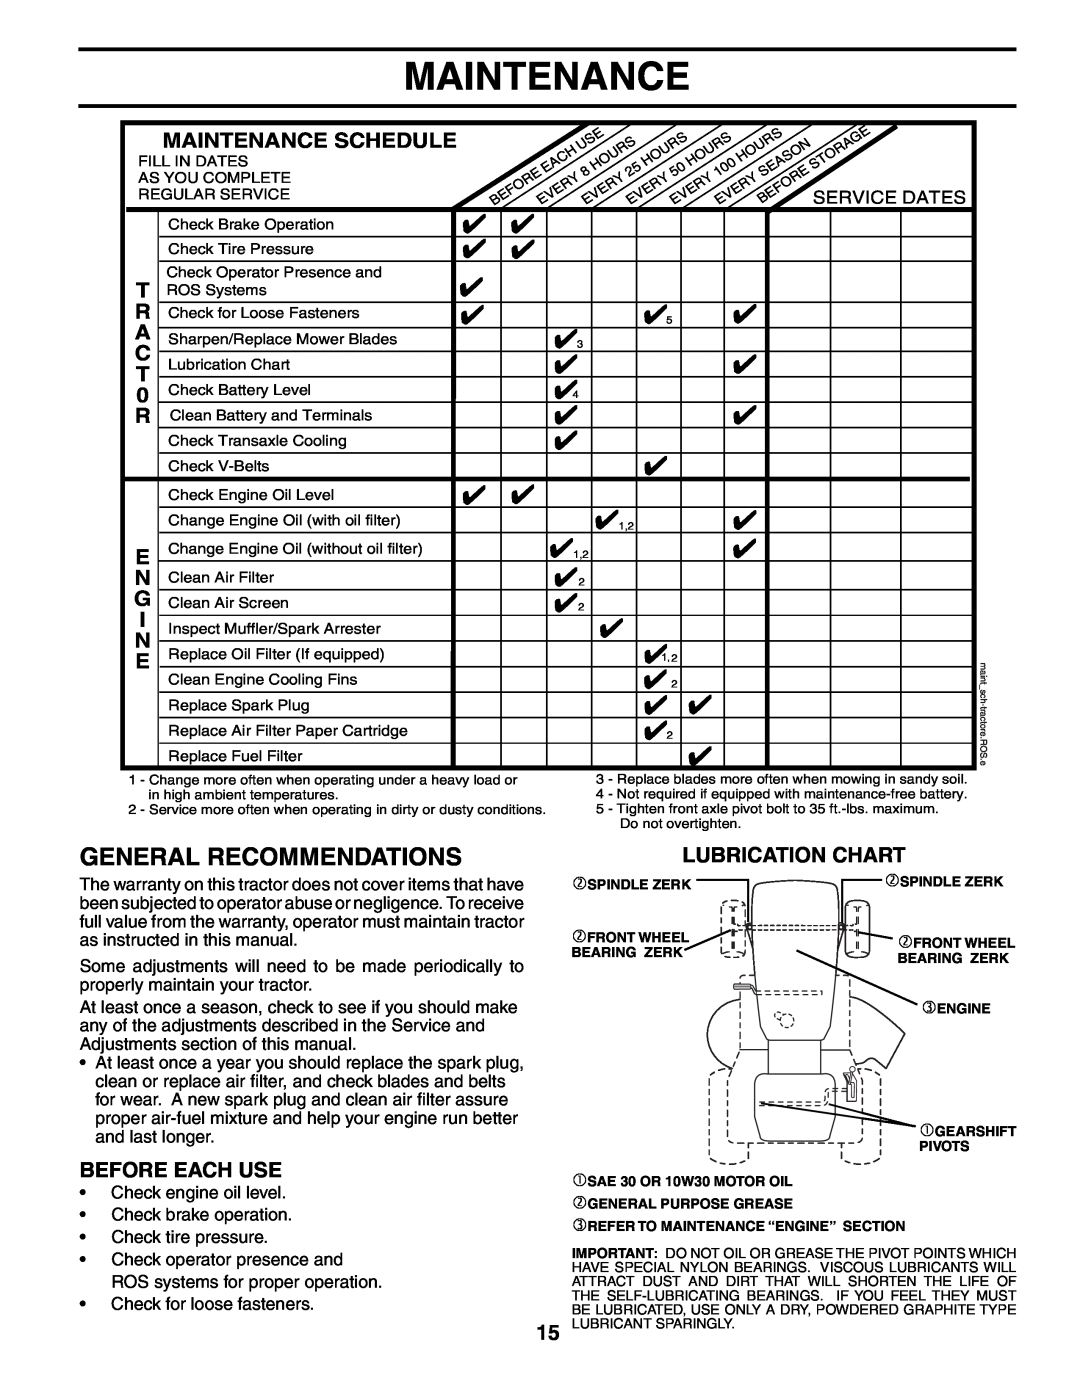 Weed Eater 96016000100 manual General Recommendations, Before Each Use, Lubrication Chart, Maintenance Schedule 